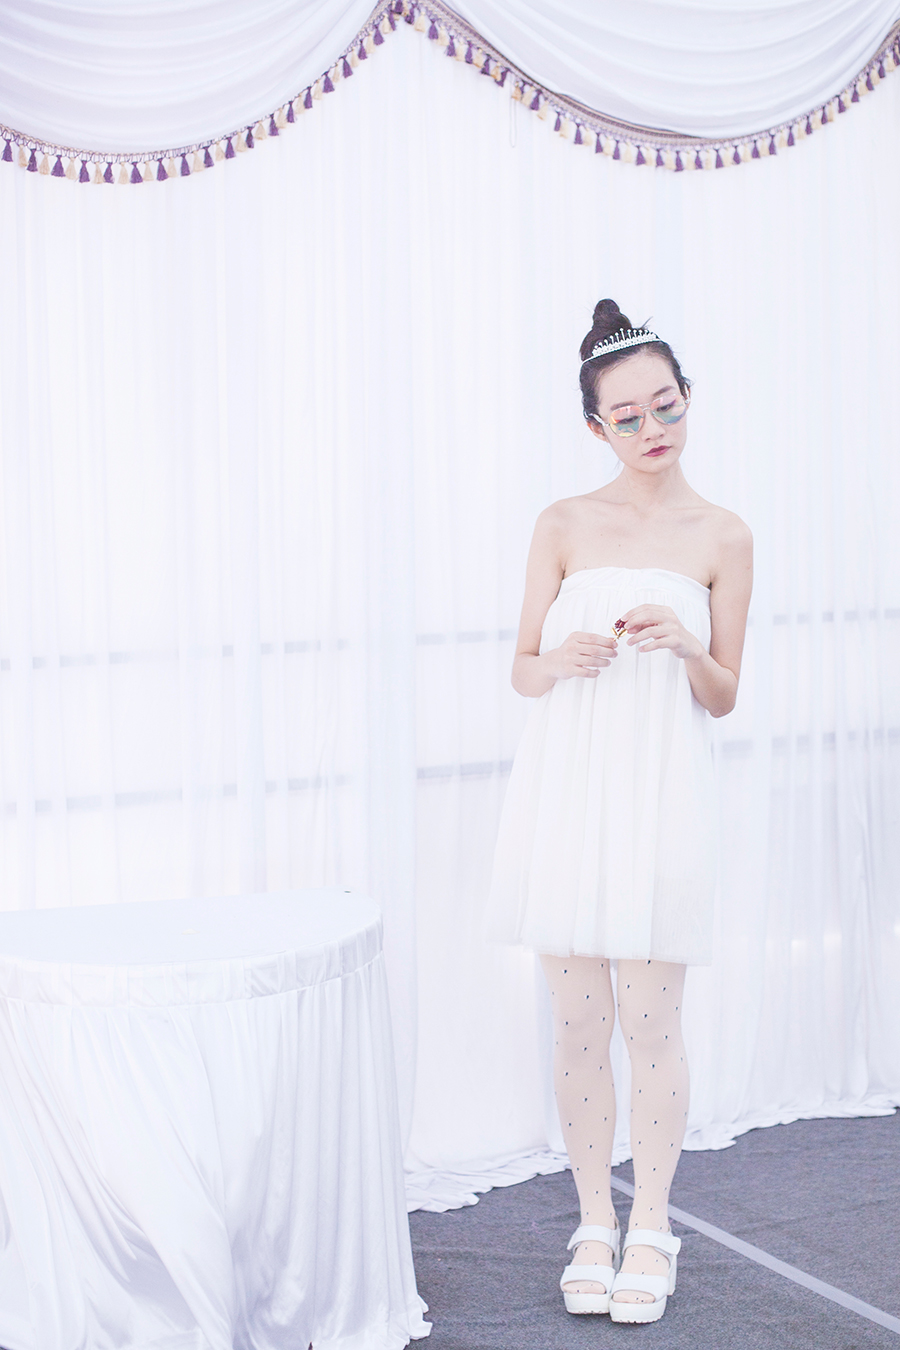 Princess outfit: Irresistible Me silver Aurora Tiara hair accessory, DressLink white tulle tutu skirt, Sunmill heart print tights from Shanghai, Taobao white platform sandals, Guess iridescent sunglasses.